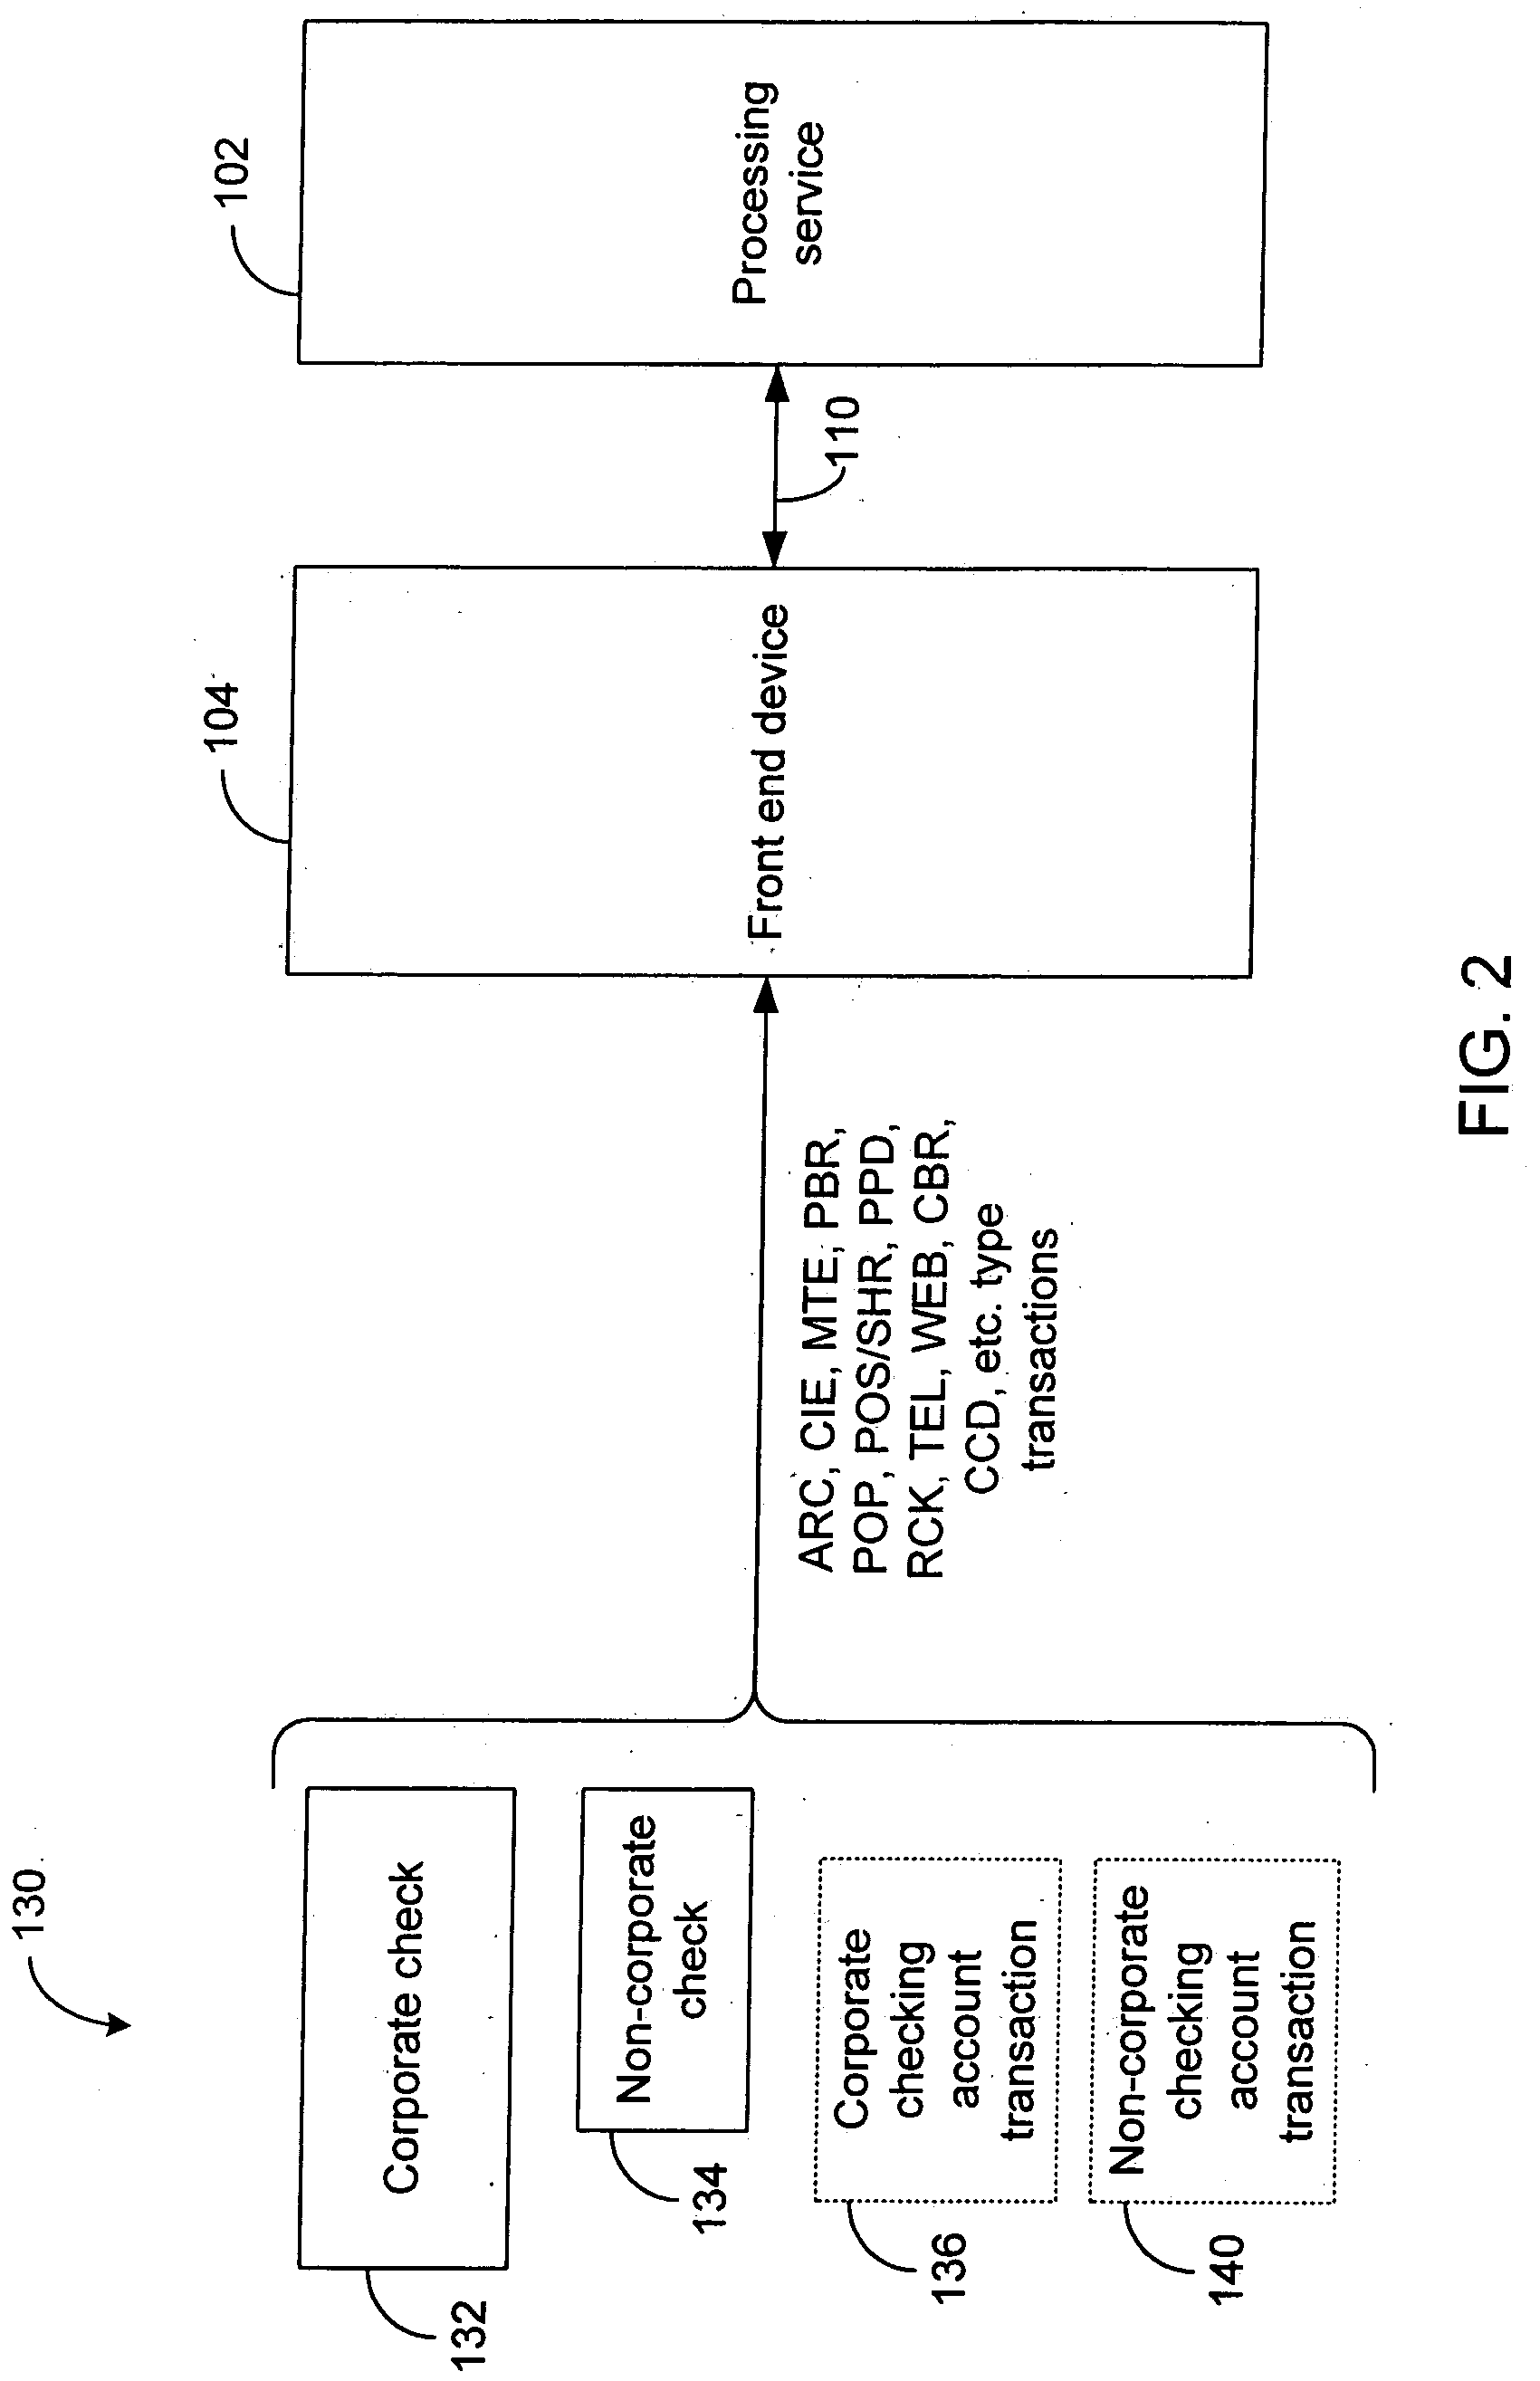 Systems and methods for detecting corporate financial transactions